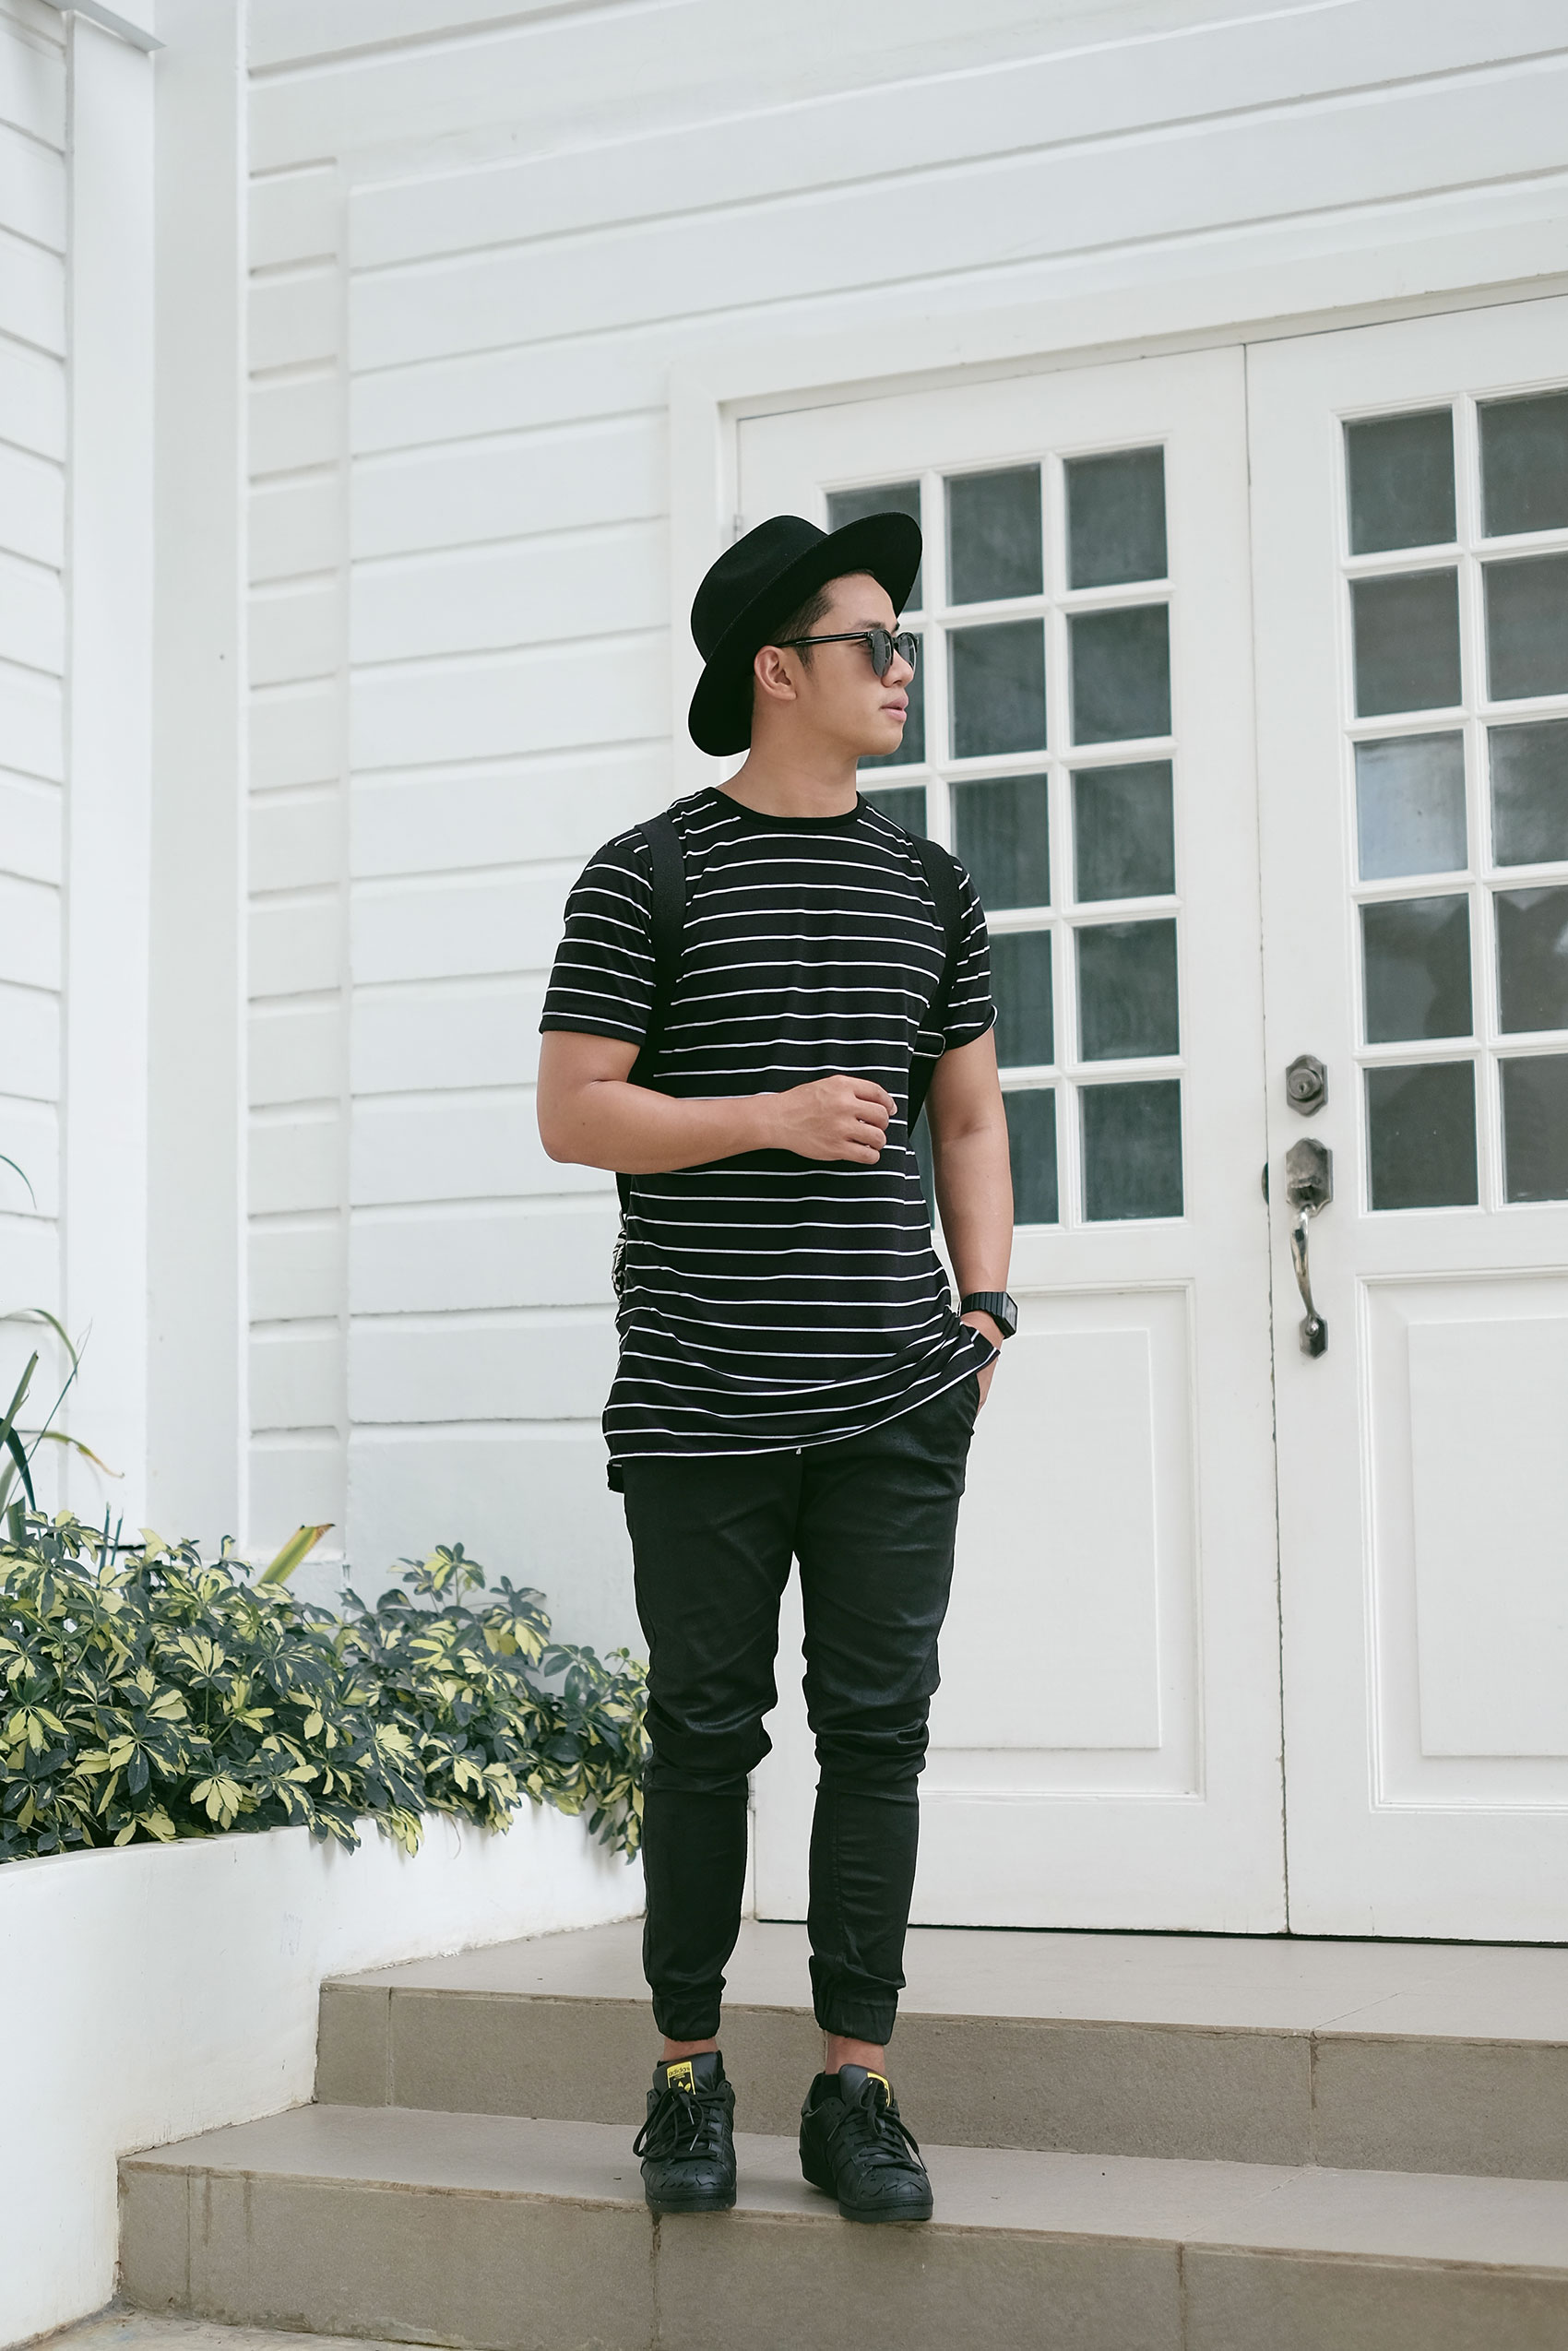 DG MANILA HOW TO: DRESS UP A CASUAL OUTFIT - VOL. I